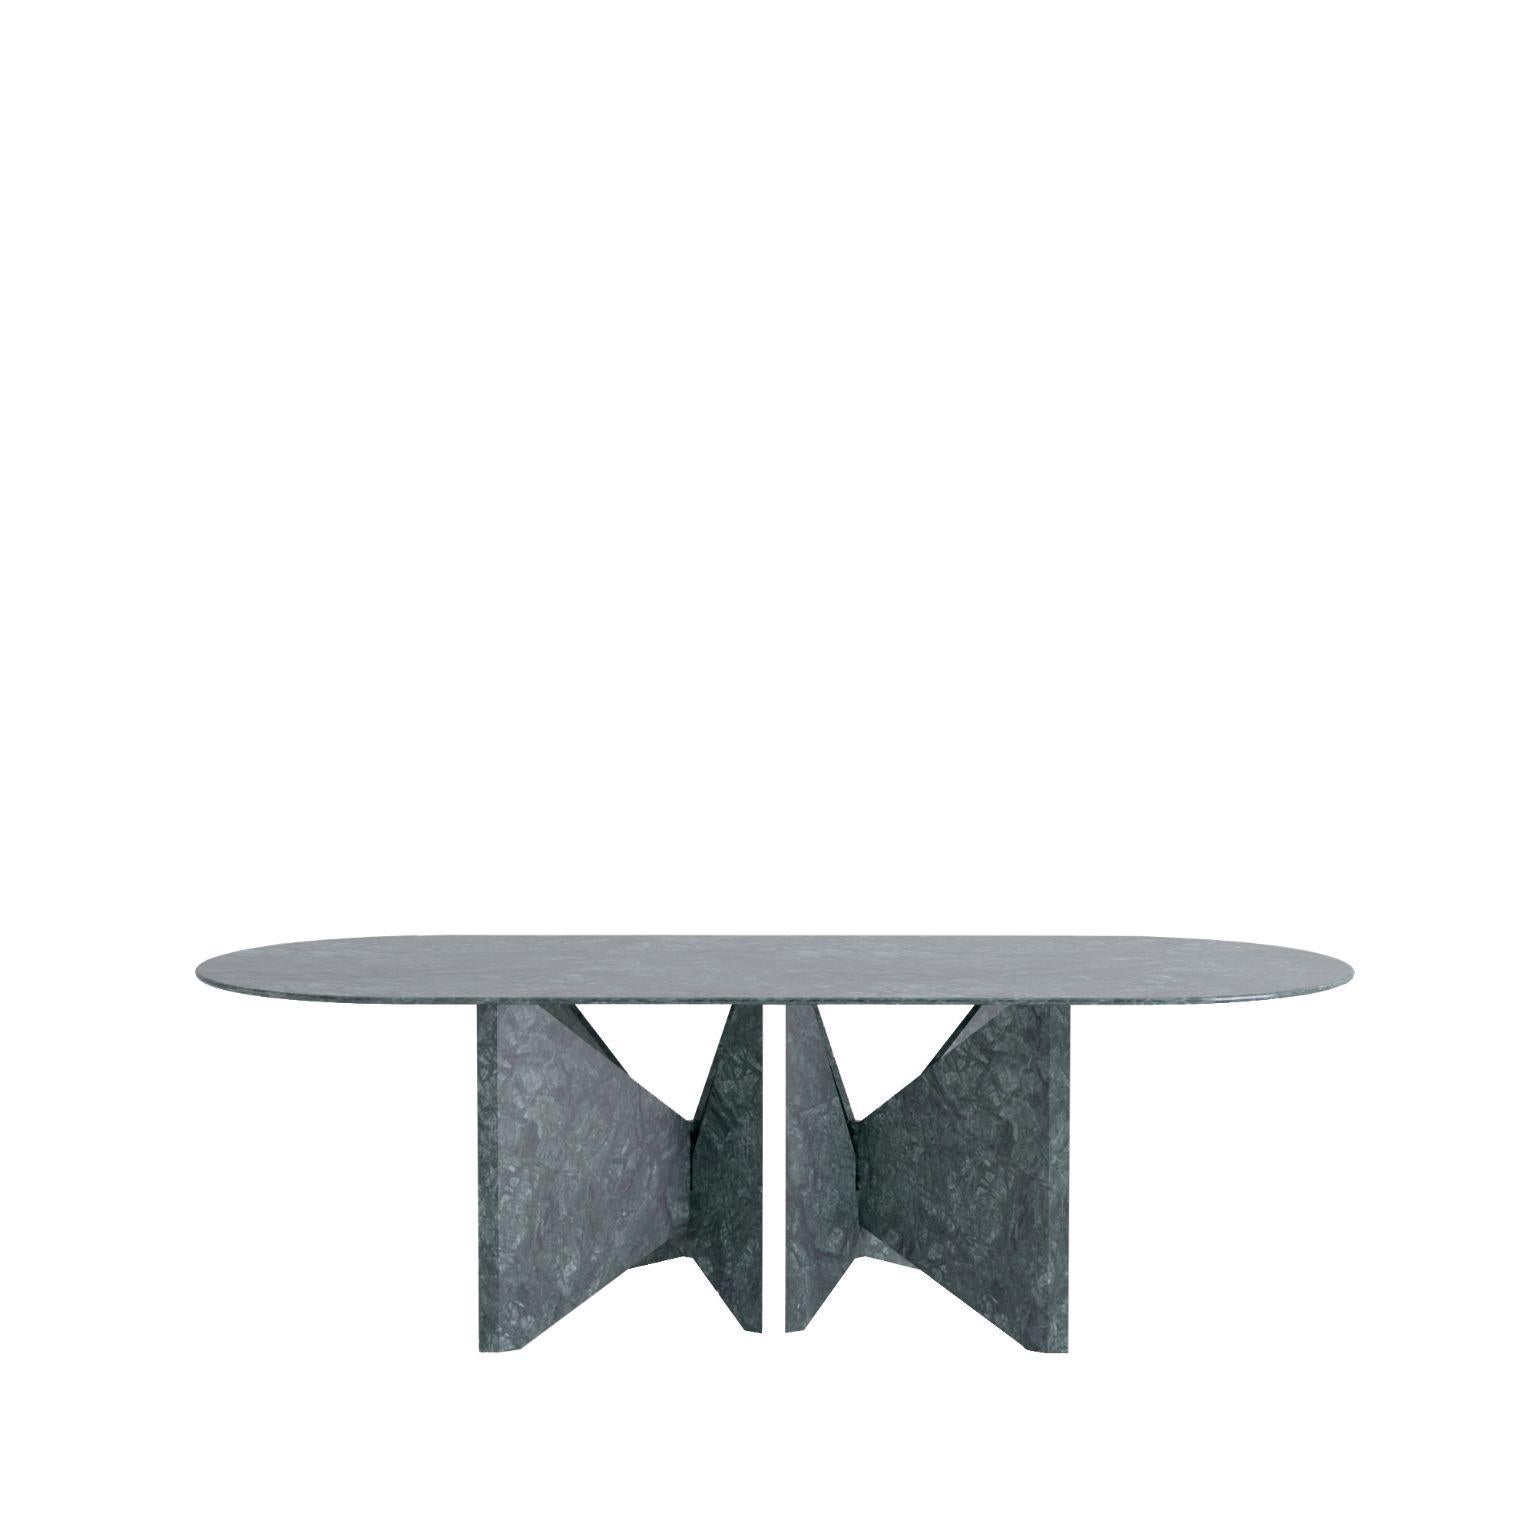 Lamina oblong table by Hannes Peer
Dimensions:D 250 x W 60 x H 76.5 cm
Materials: Indian Green marble.
Also available in different finishes.

Lamina is a dinner table relying on the intersection of marble slabs. Hannes Peer drew his inspiration